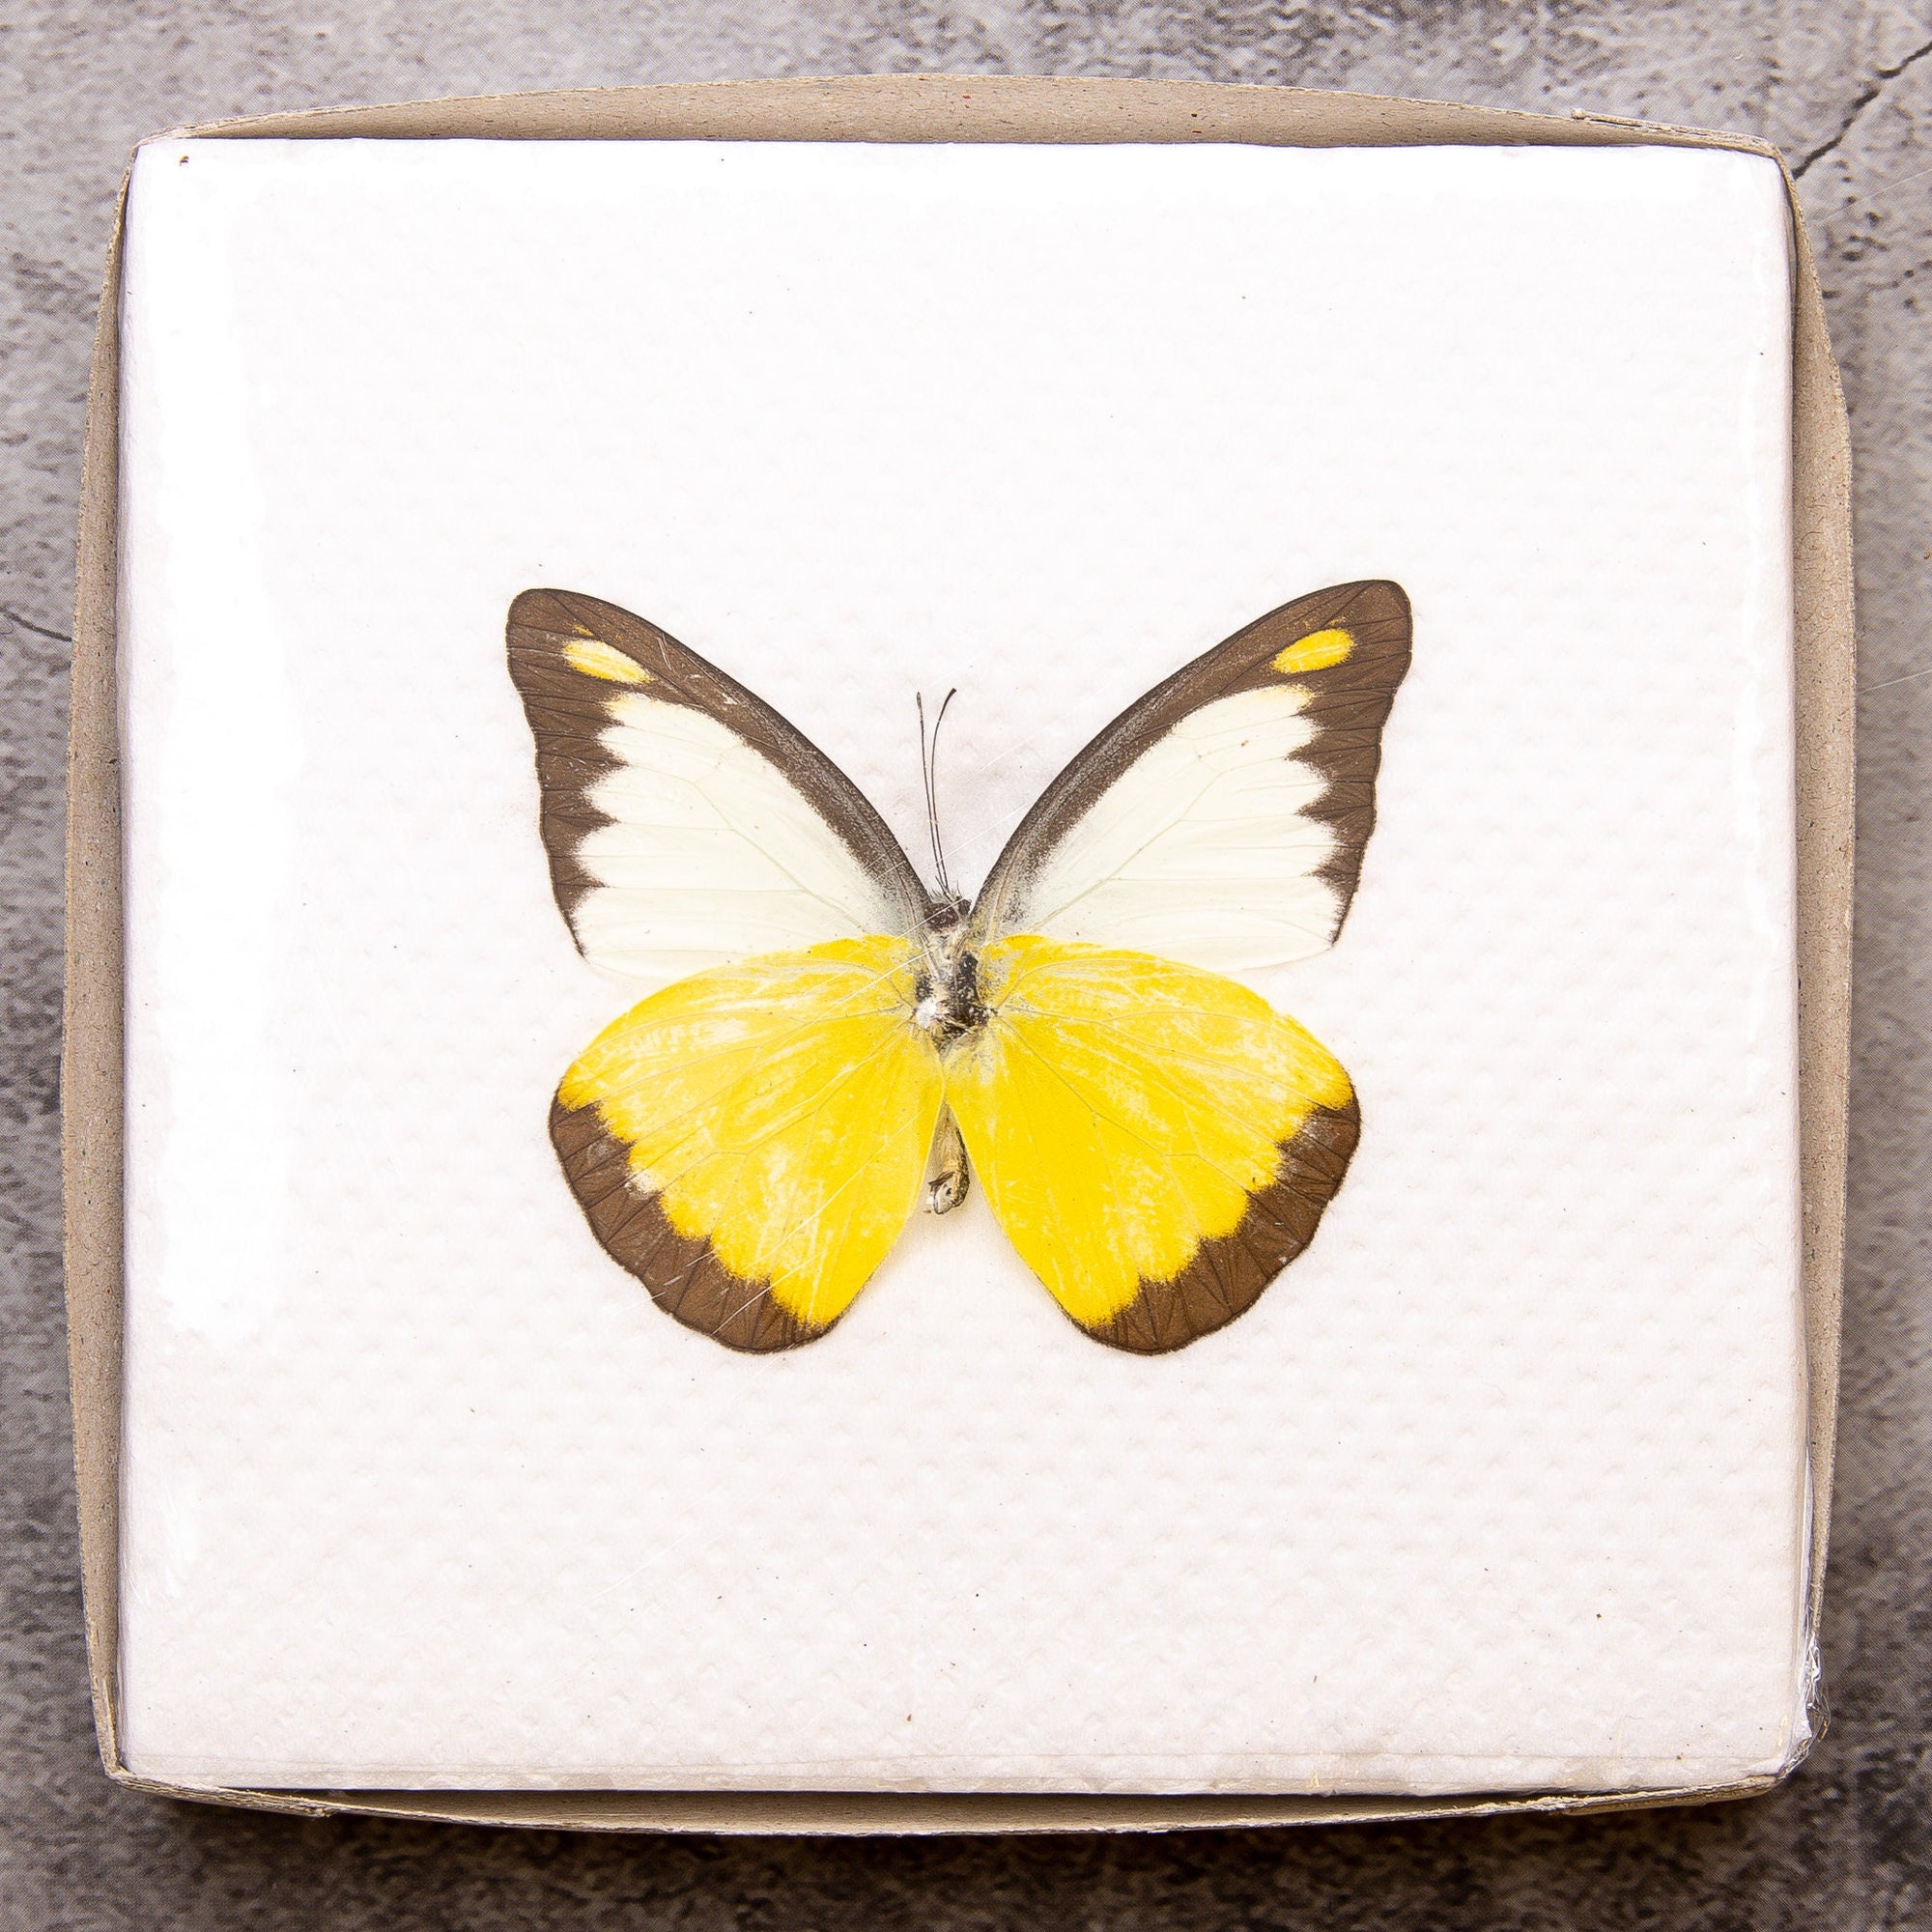 Pack of 2 Chocolate Albatross Butterflies (Appias lyncida) WINGS-SPREAD, Ethically Sourced Preserved Specimens for Collecting & Art